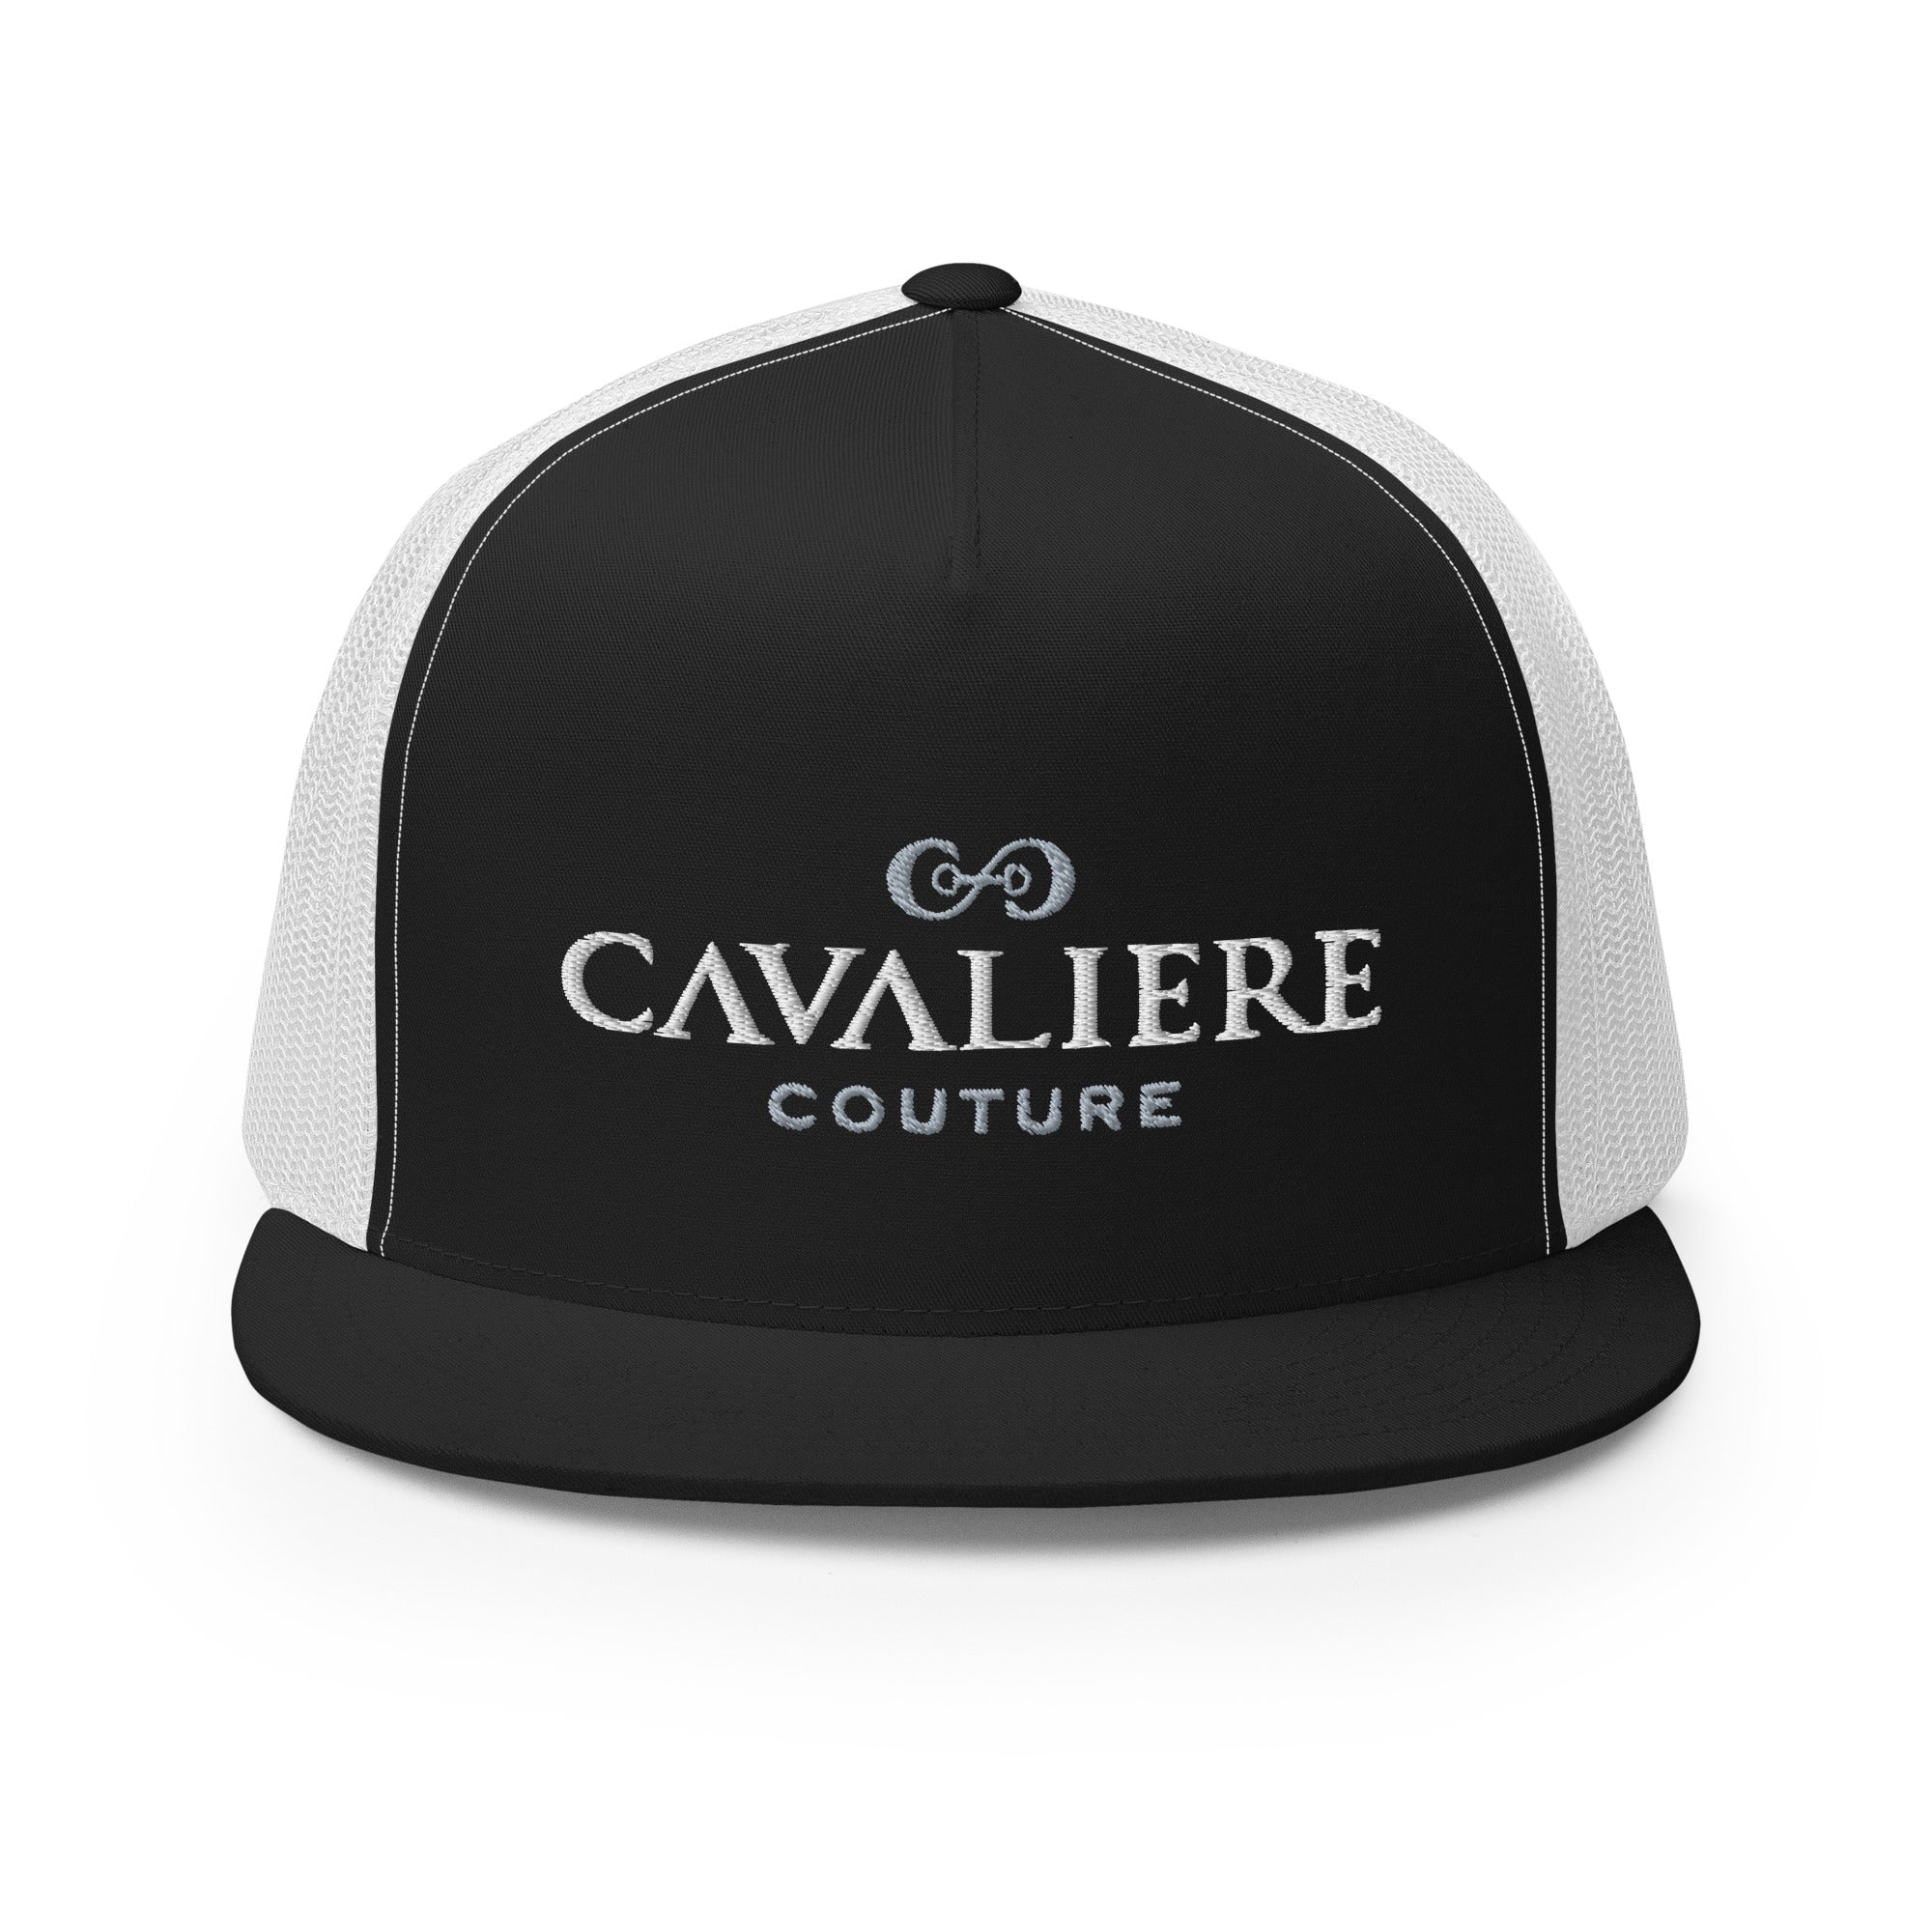 hat cavaliere couture